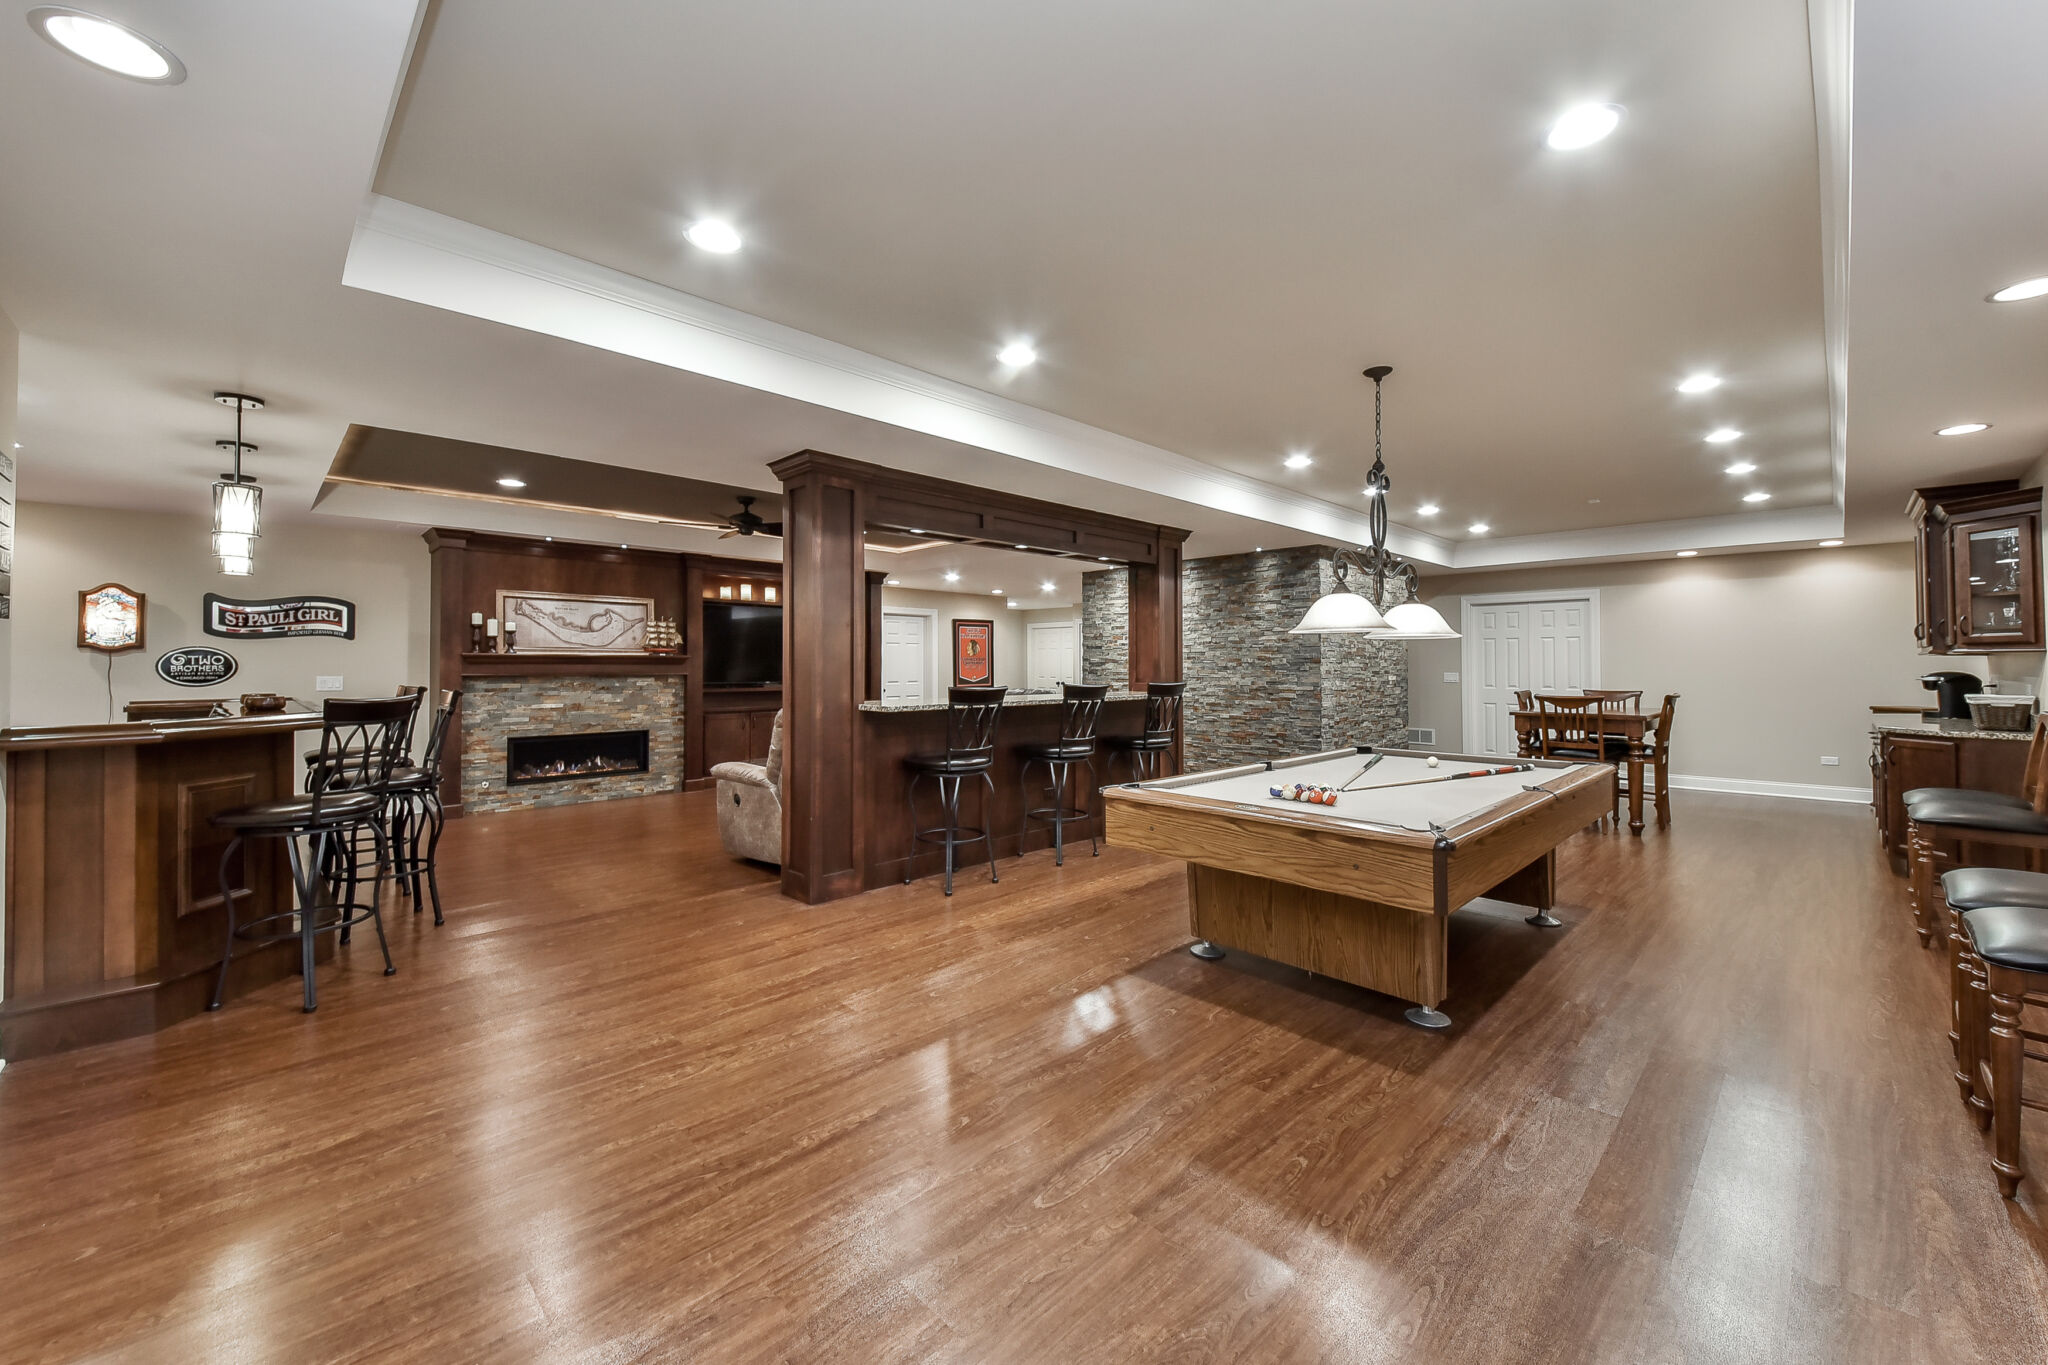 Basement Heating Options To Keep Your Family Warm Comfy Home